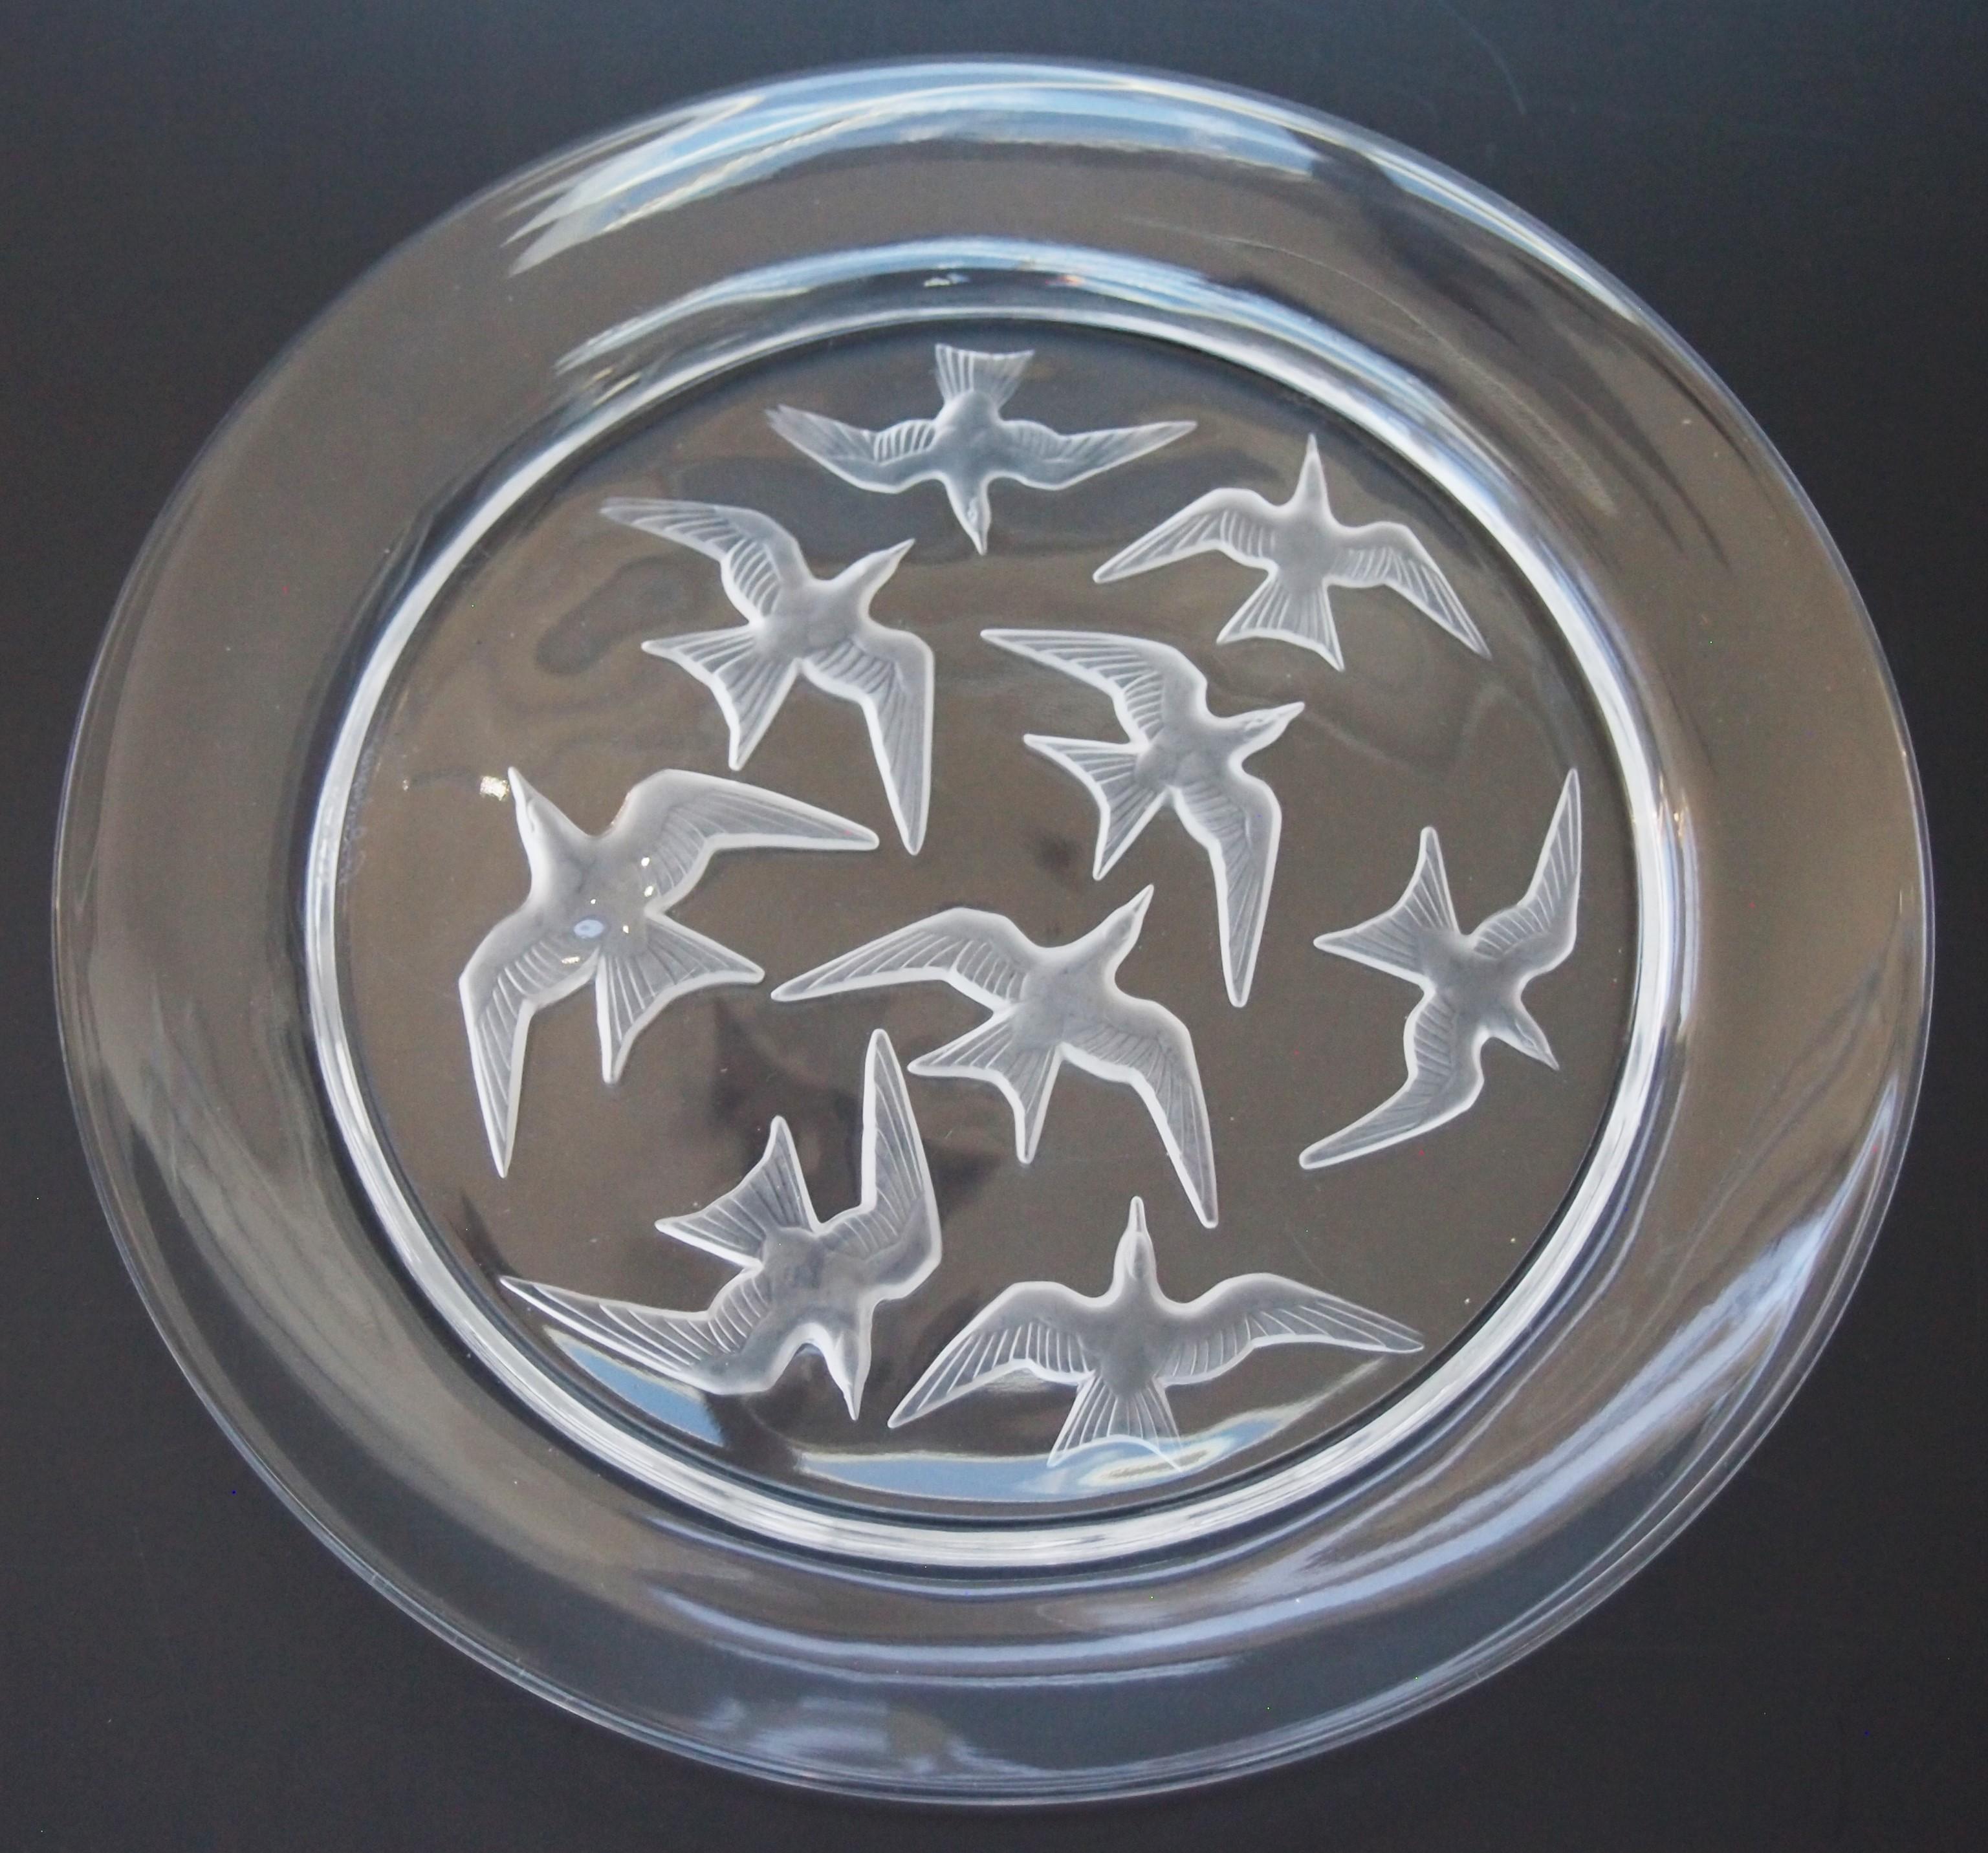 Amazing Rene Lalique presentation plate  - Mouettes - Commissioned by The City of Paris to be given to King George VI and his wife Queen Elizabeth (later known as the Queen Mother) in 1938 on the occasion of their first and only state visit to